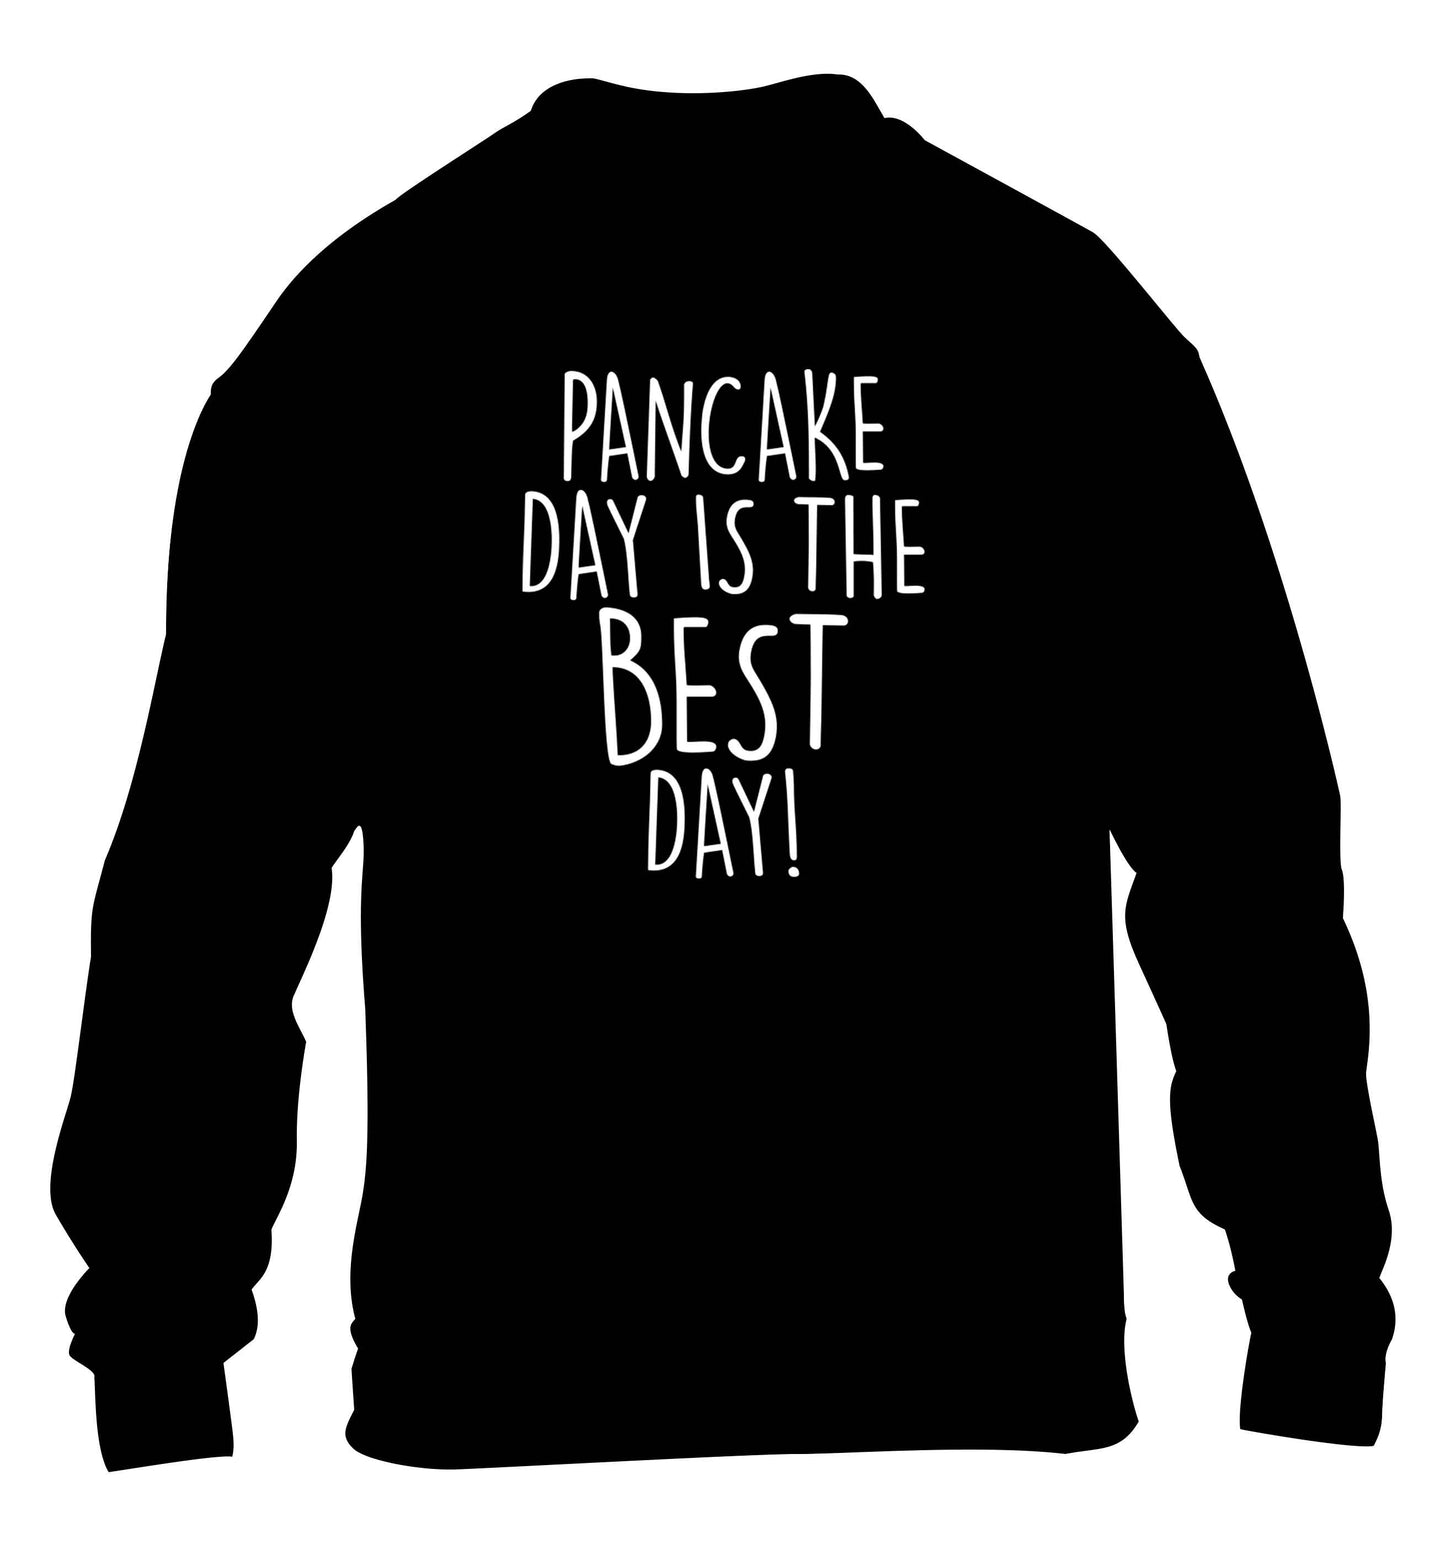 Pancake day is the best day children's black sweater 12-13 Years